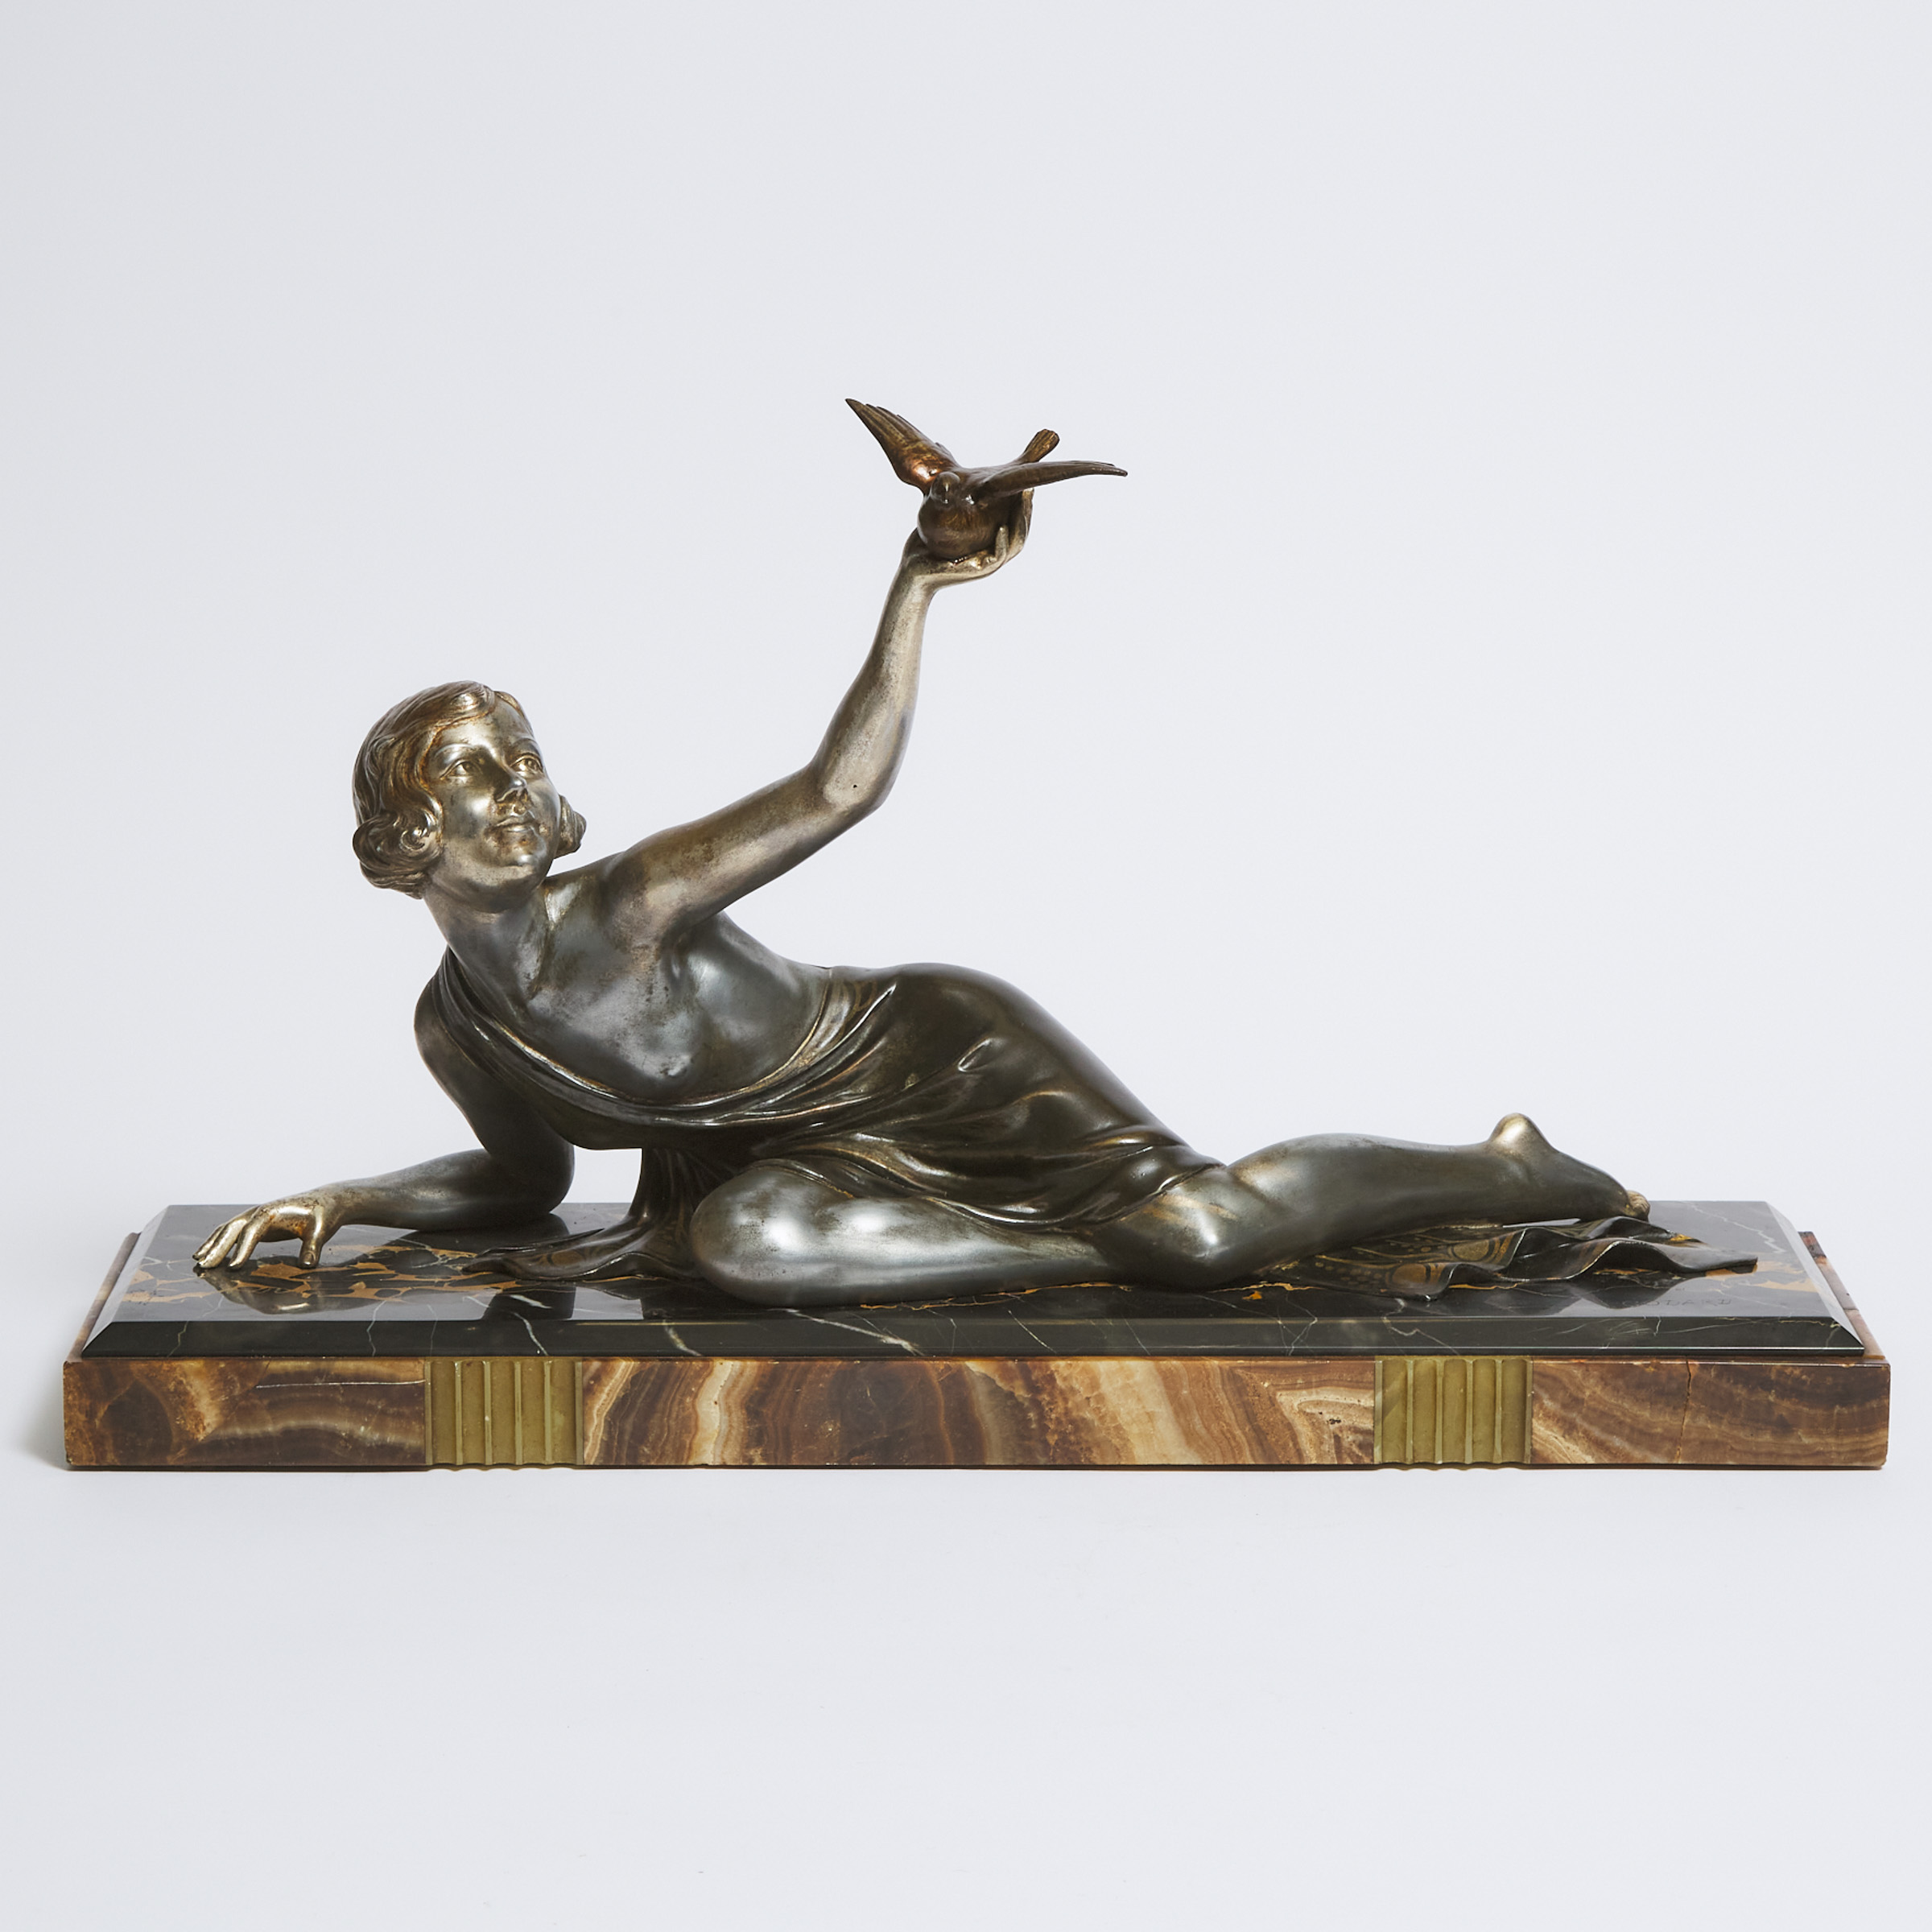 French Art Deco Figural Sculpture by Armand Godard, c.1930